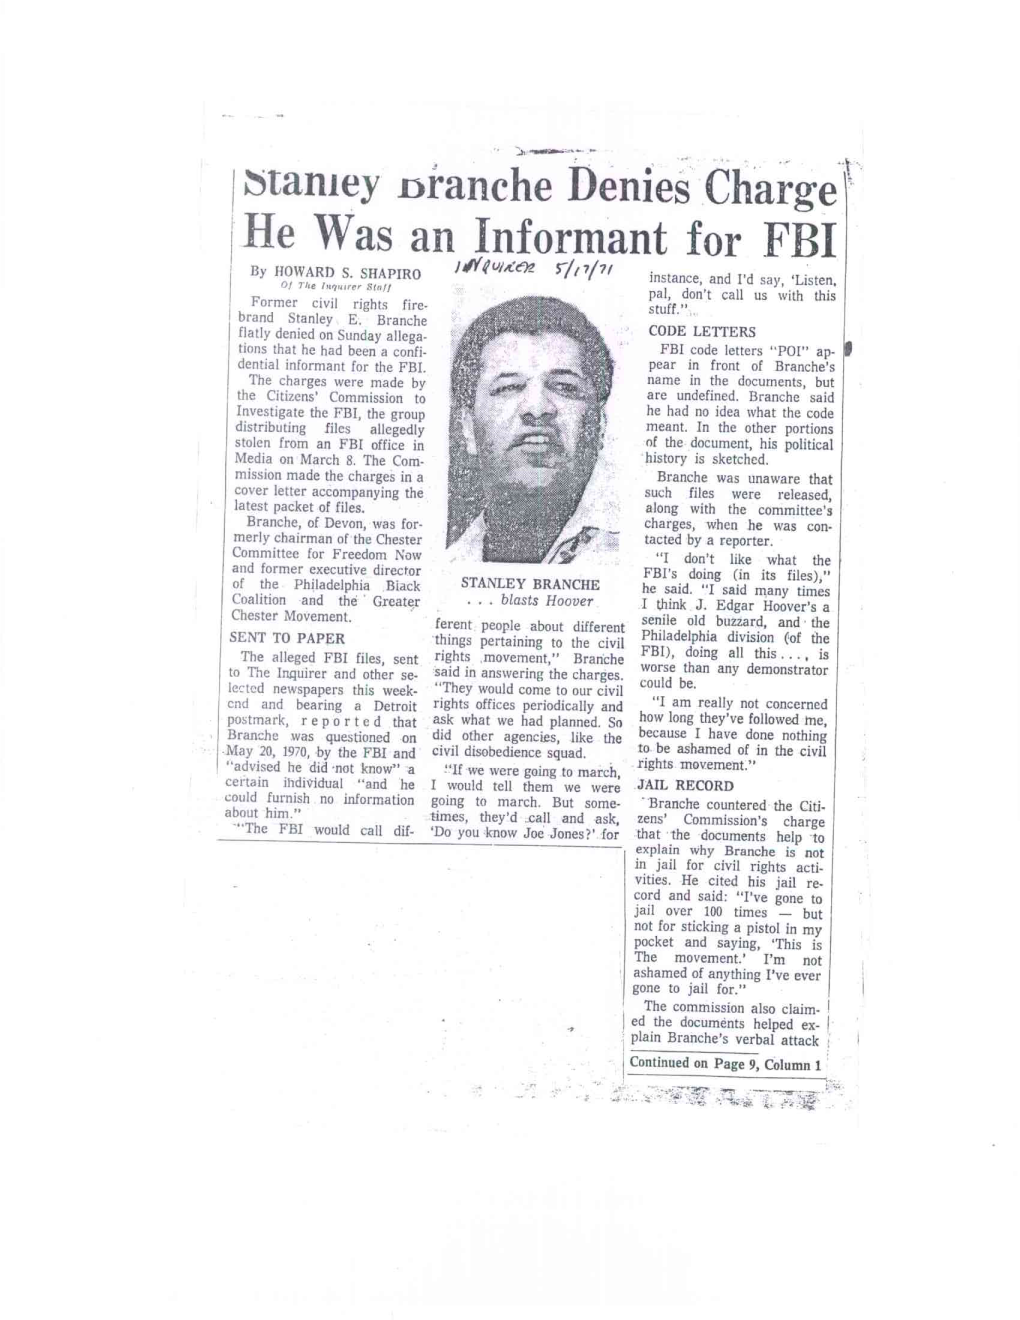 6Tamey Dianche Denies Charge He Was an Informant for FBI 1Rntibee92 5117/7/ by HOWARD S